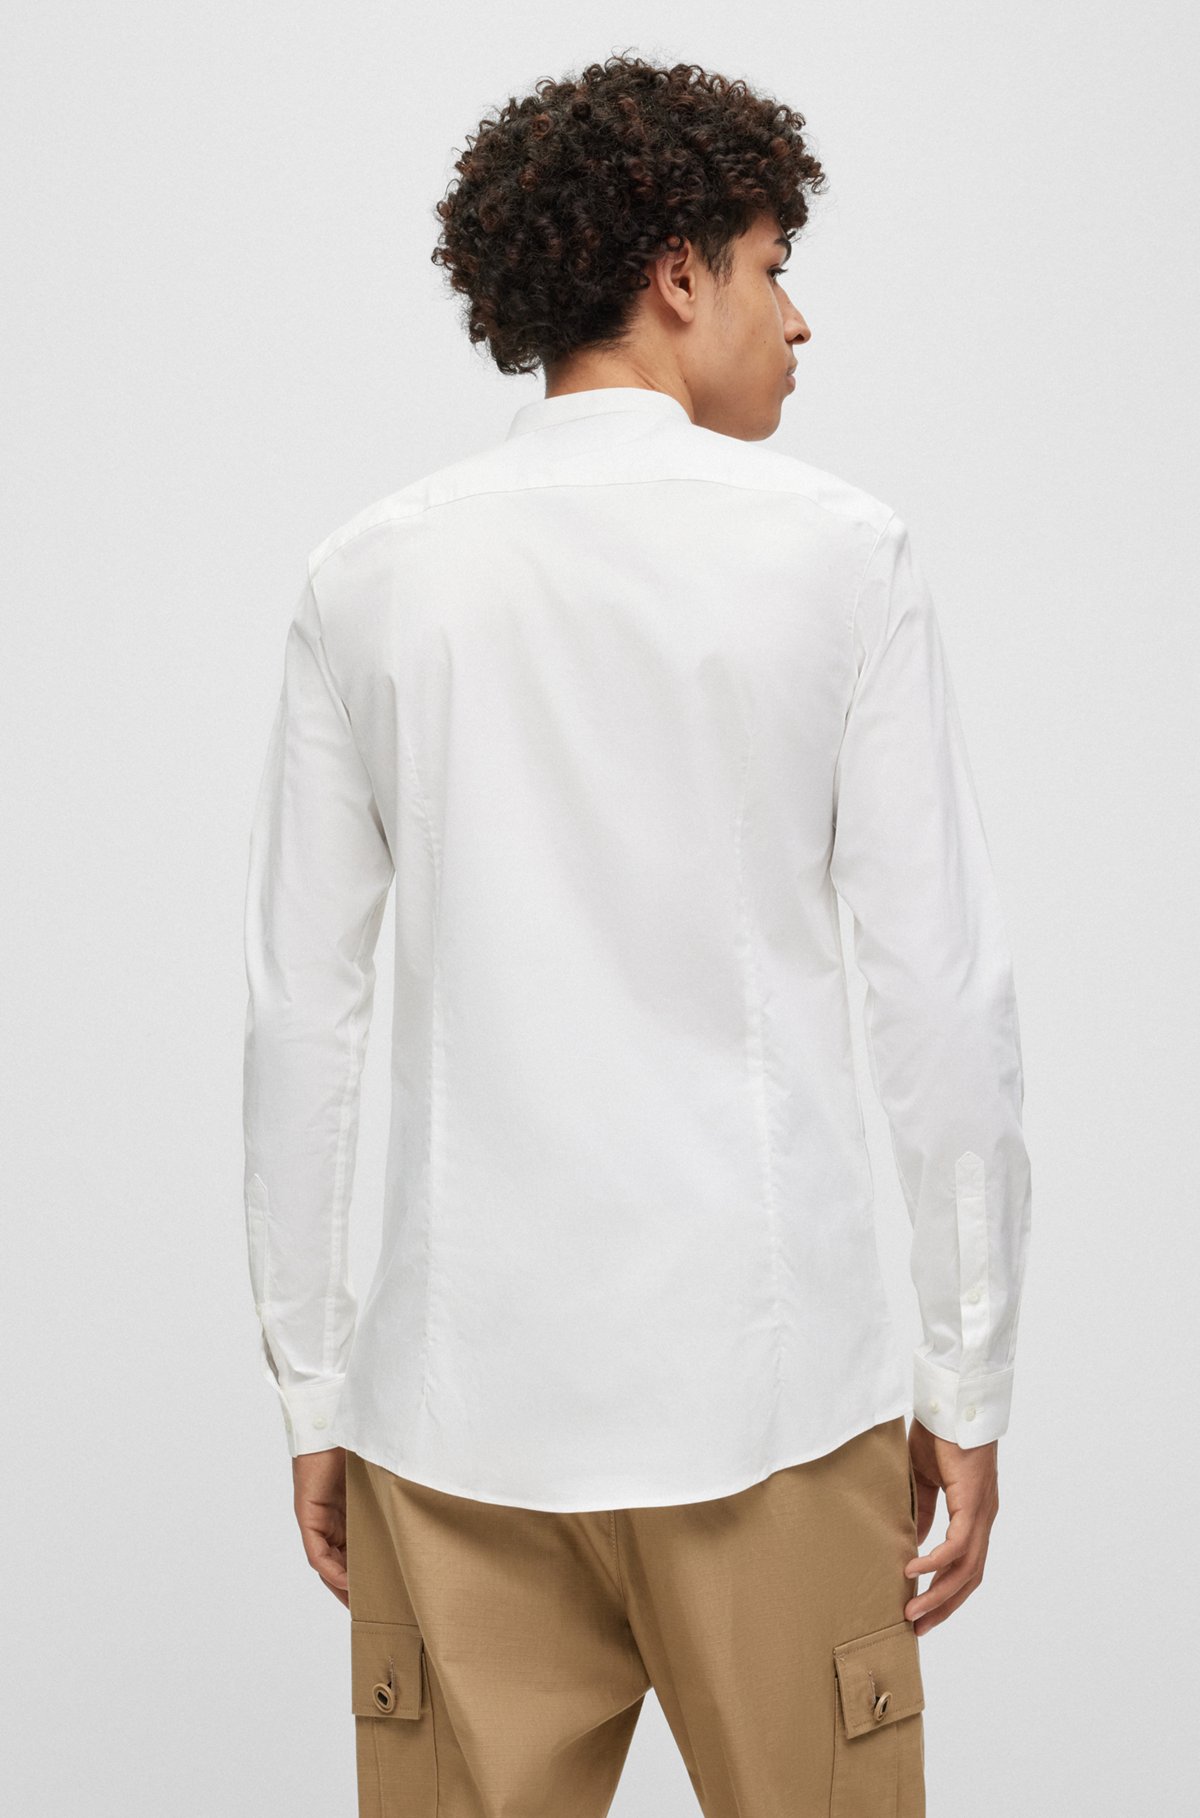 Extra-slim-fit shirt in stretch cotton with stand collar, White